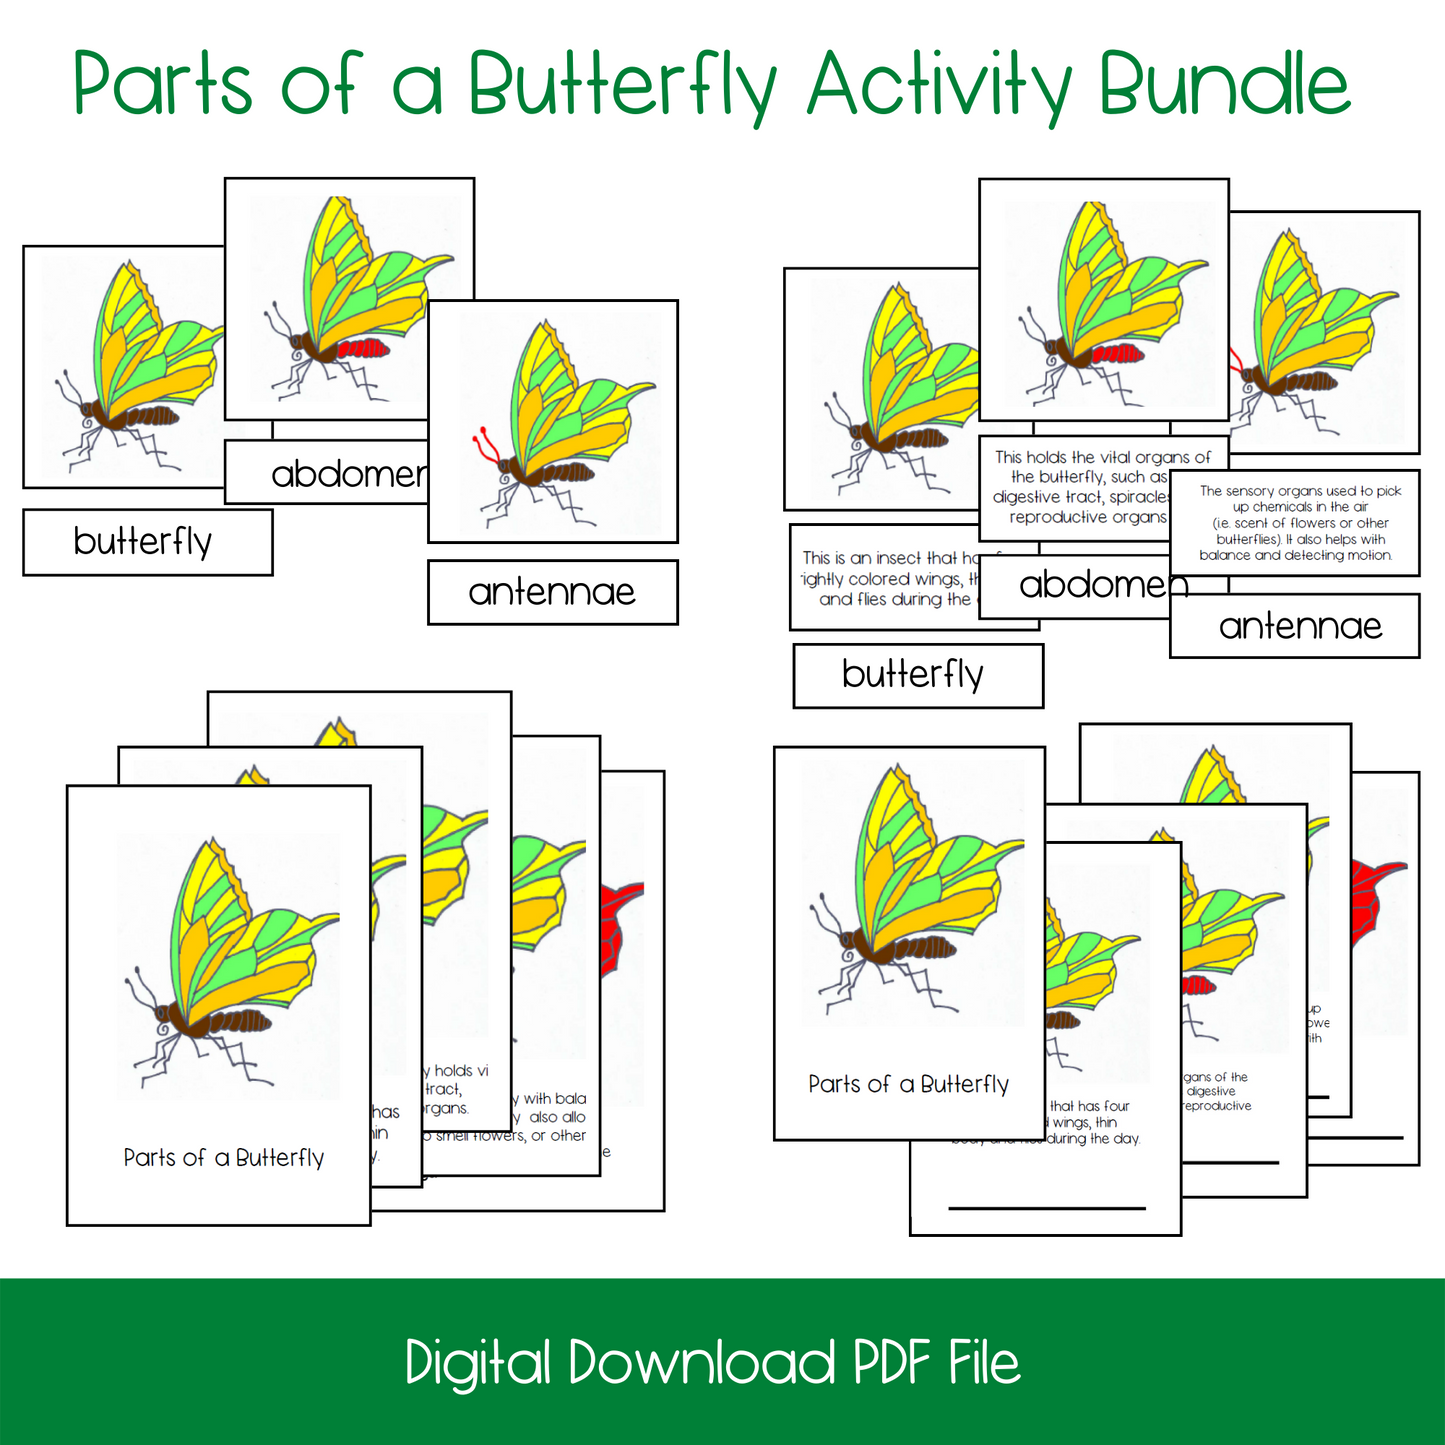 Montessori Parts of a Butterfly Nomenclature and 3-Part Cards, printable kindergarten life science activity, printable elementary life science activity, printable butterfly lesson activity